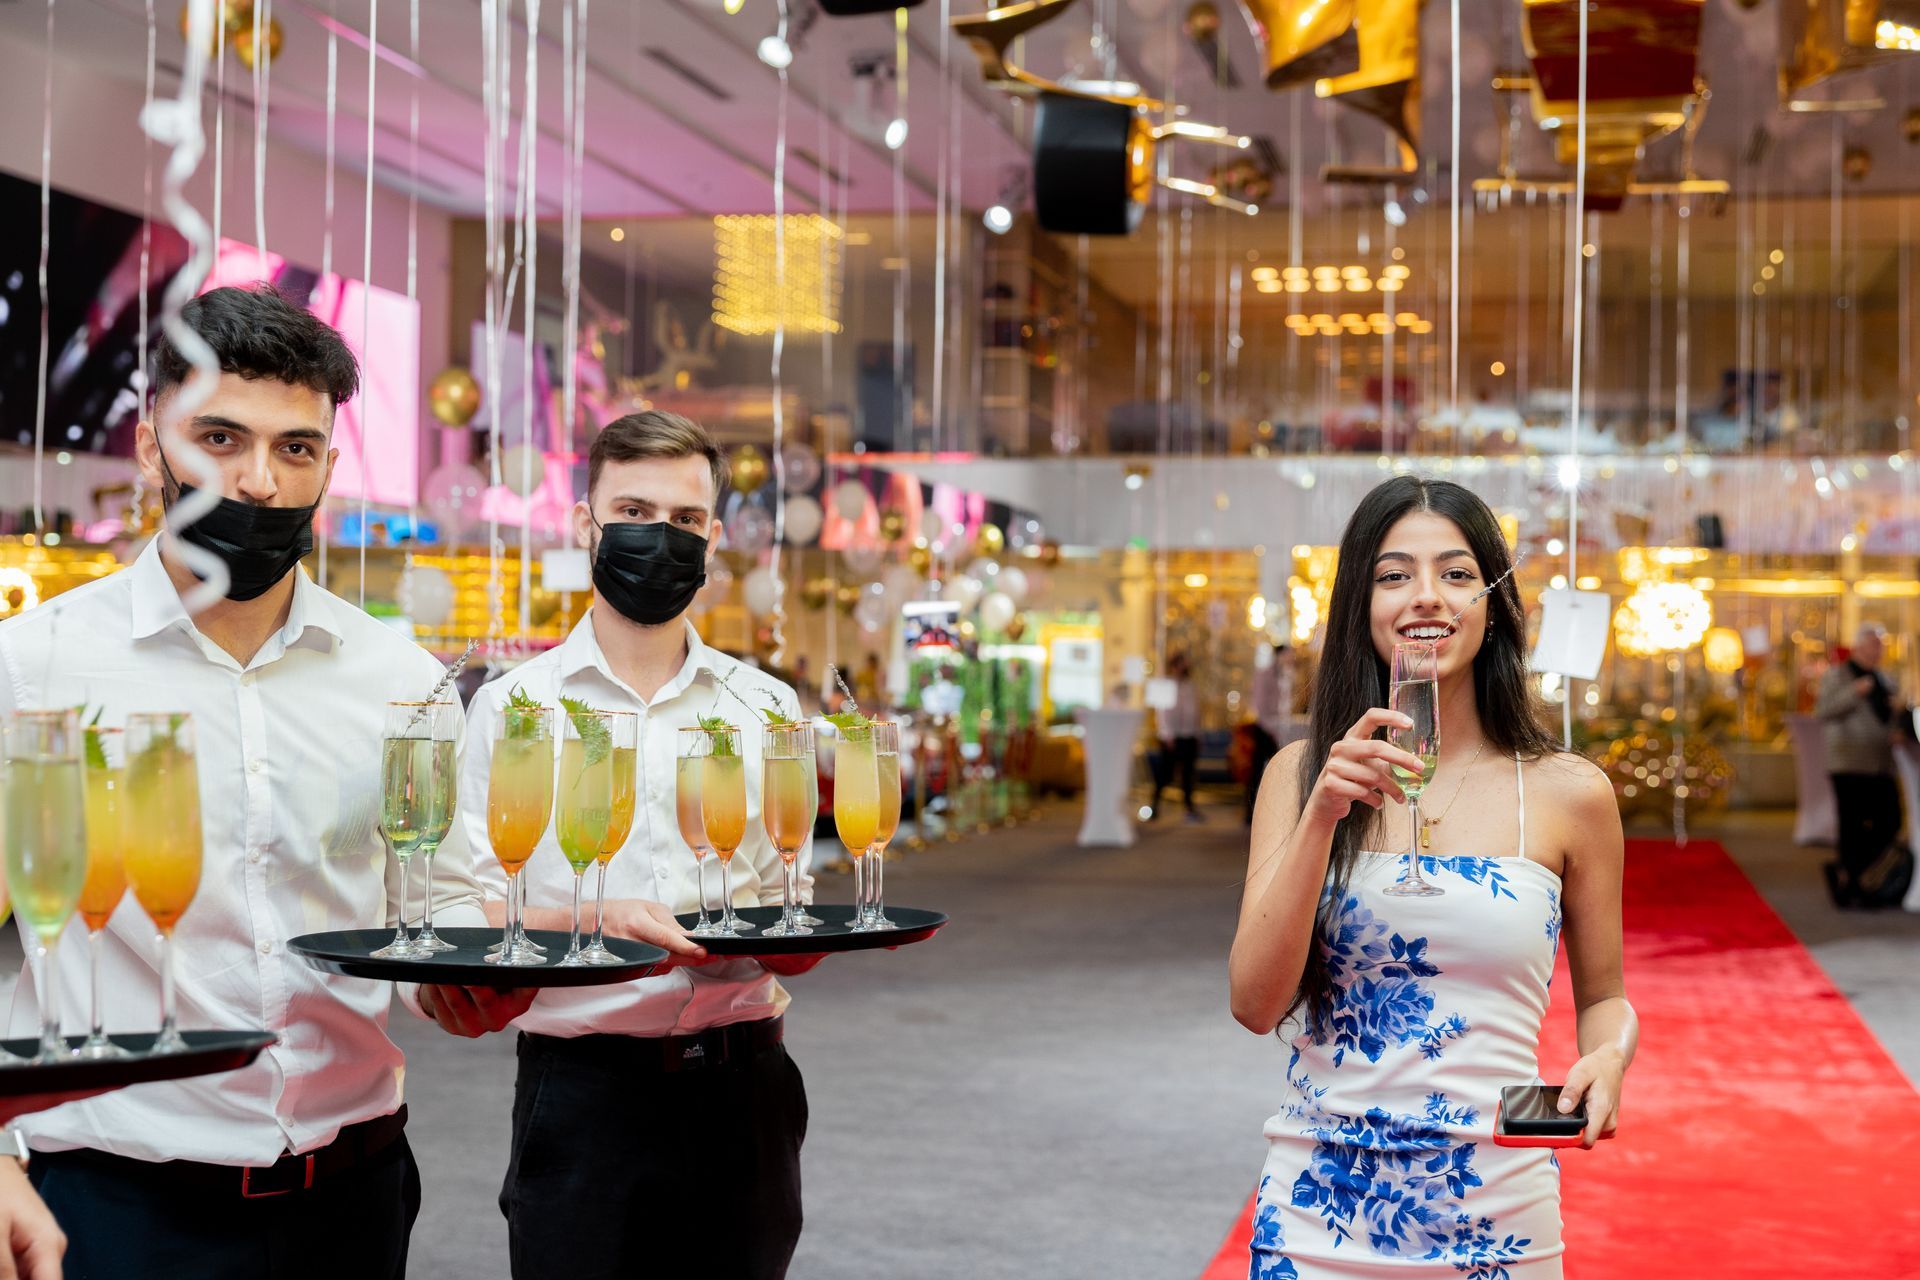 a woman is standing next to two waiters holding trays of champagne glasses .